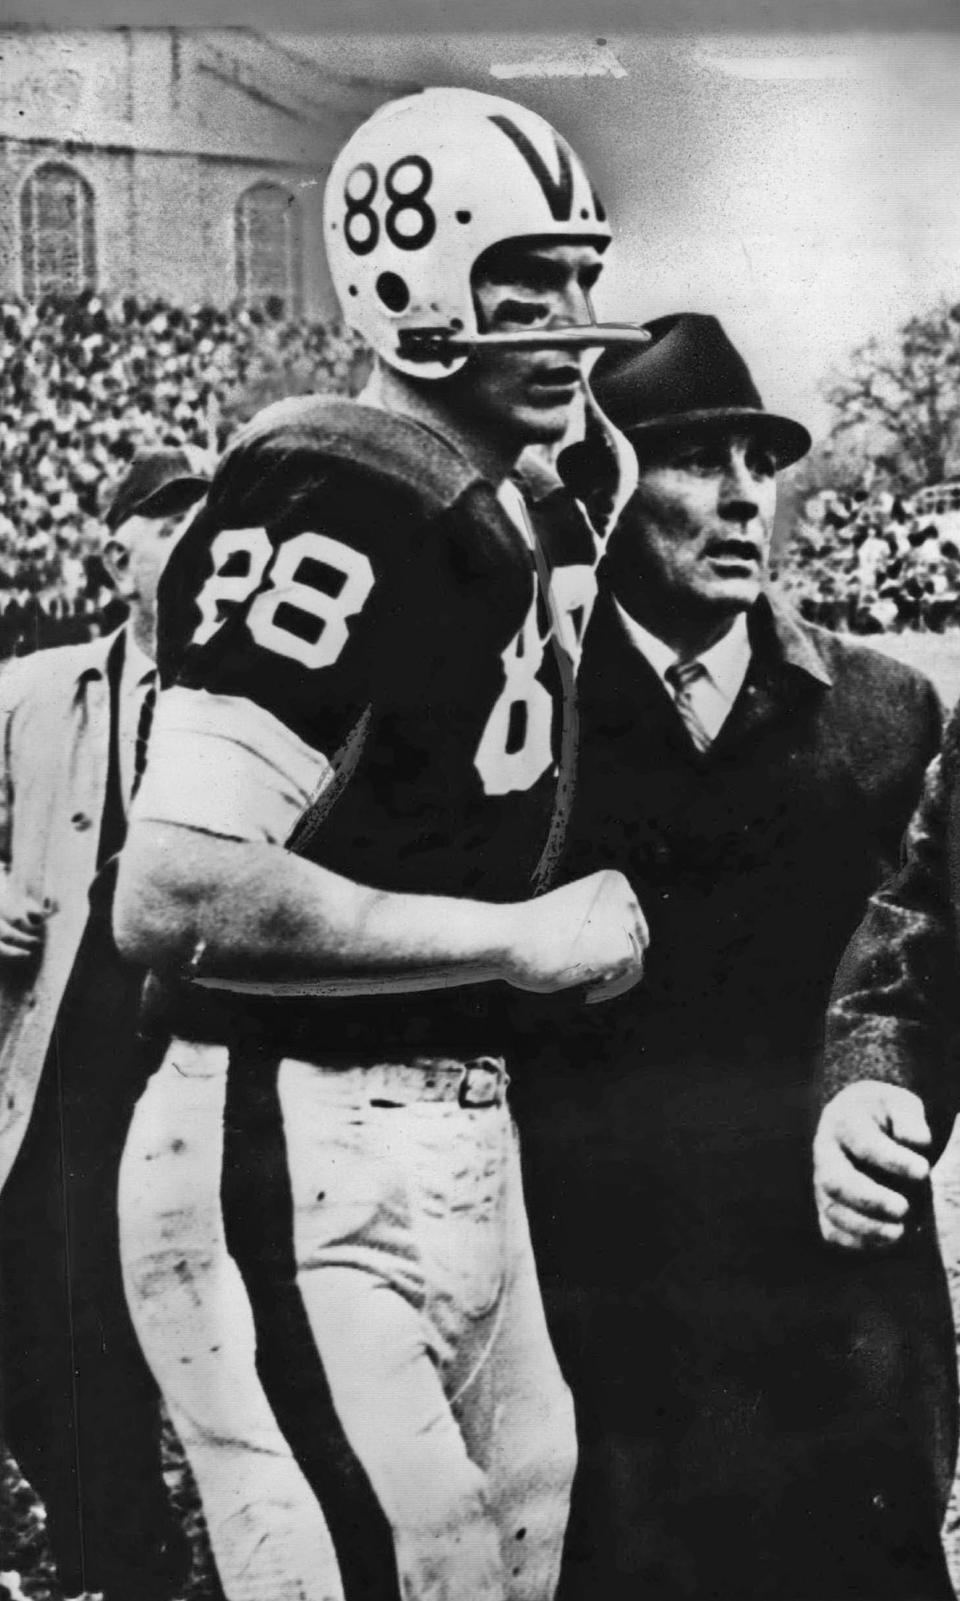 Pat Richter led the Big Ten in receptions in 1961 and 1962 and was a first-team All-American both years.